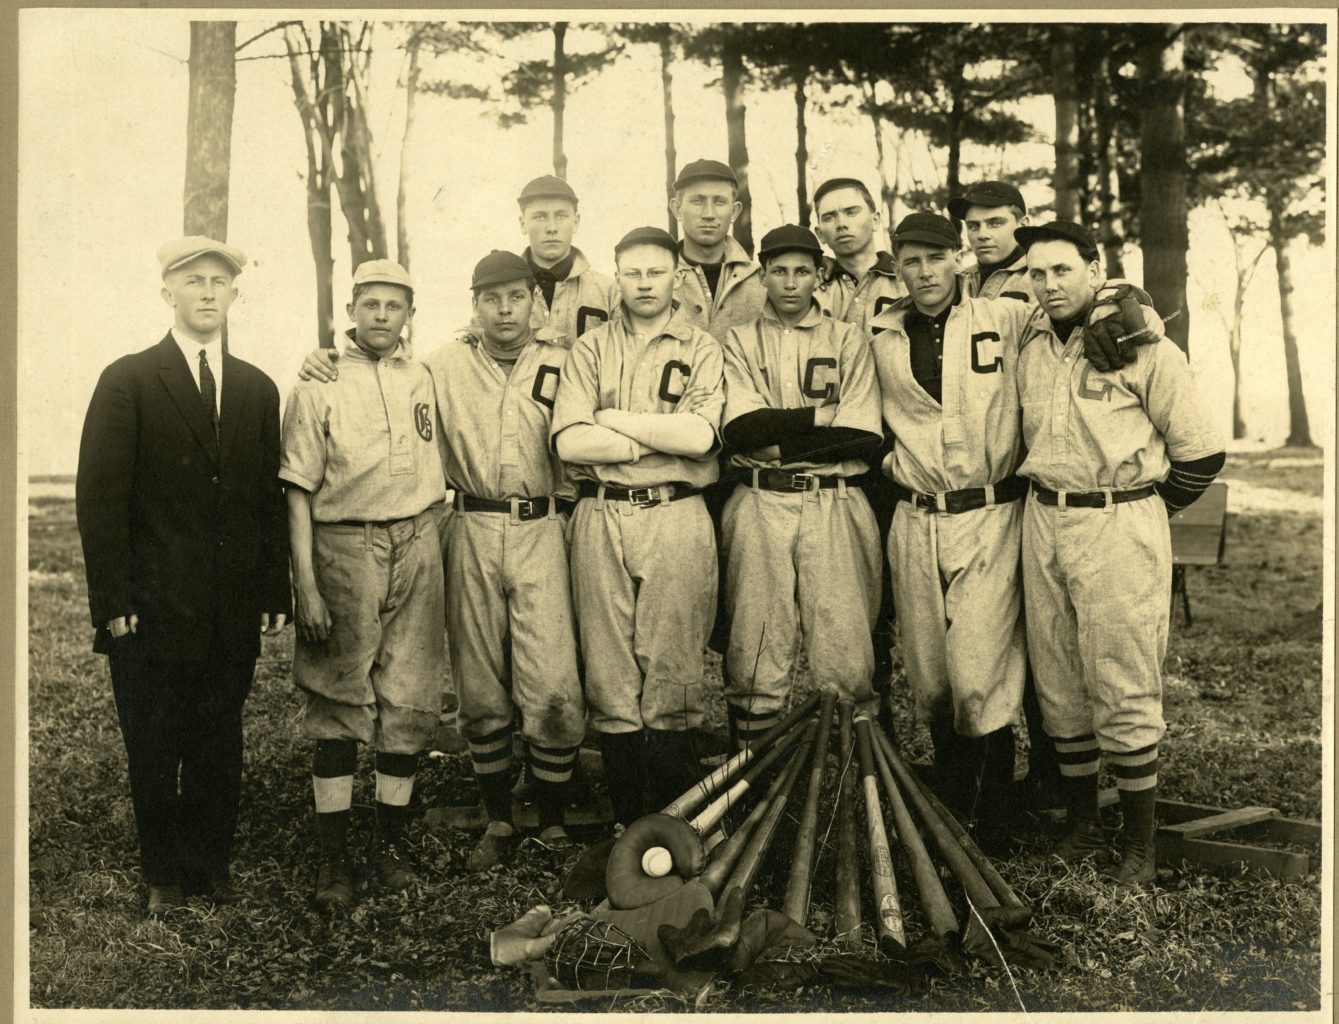 Group of men, part of Gale College Baseball Team, in Galesville, WI